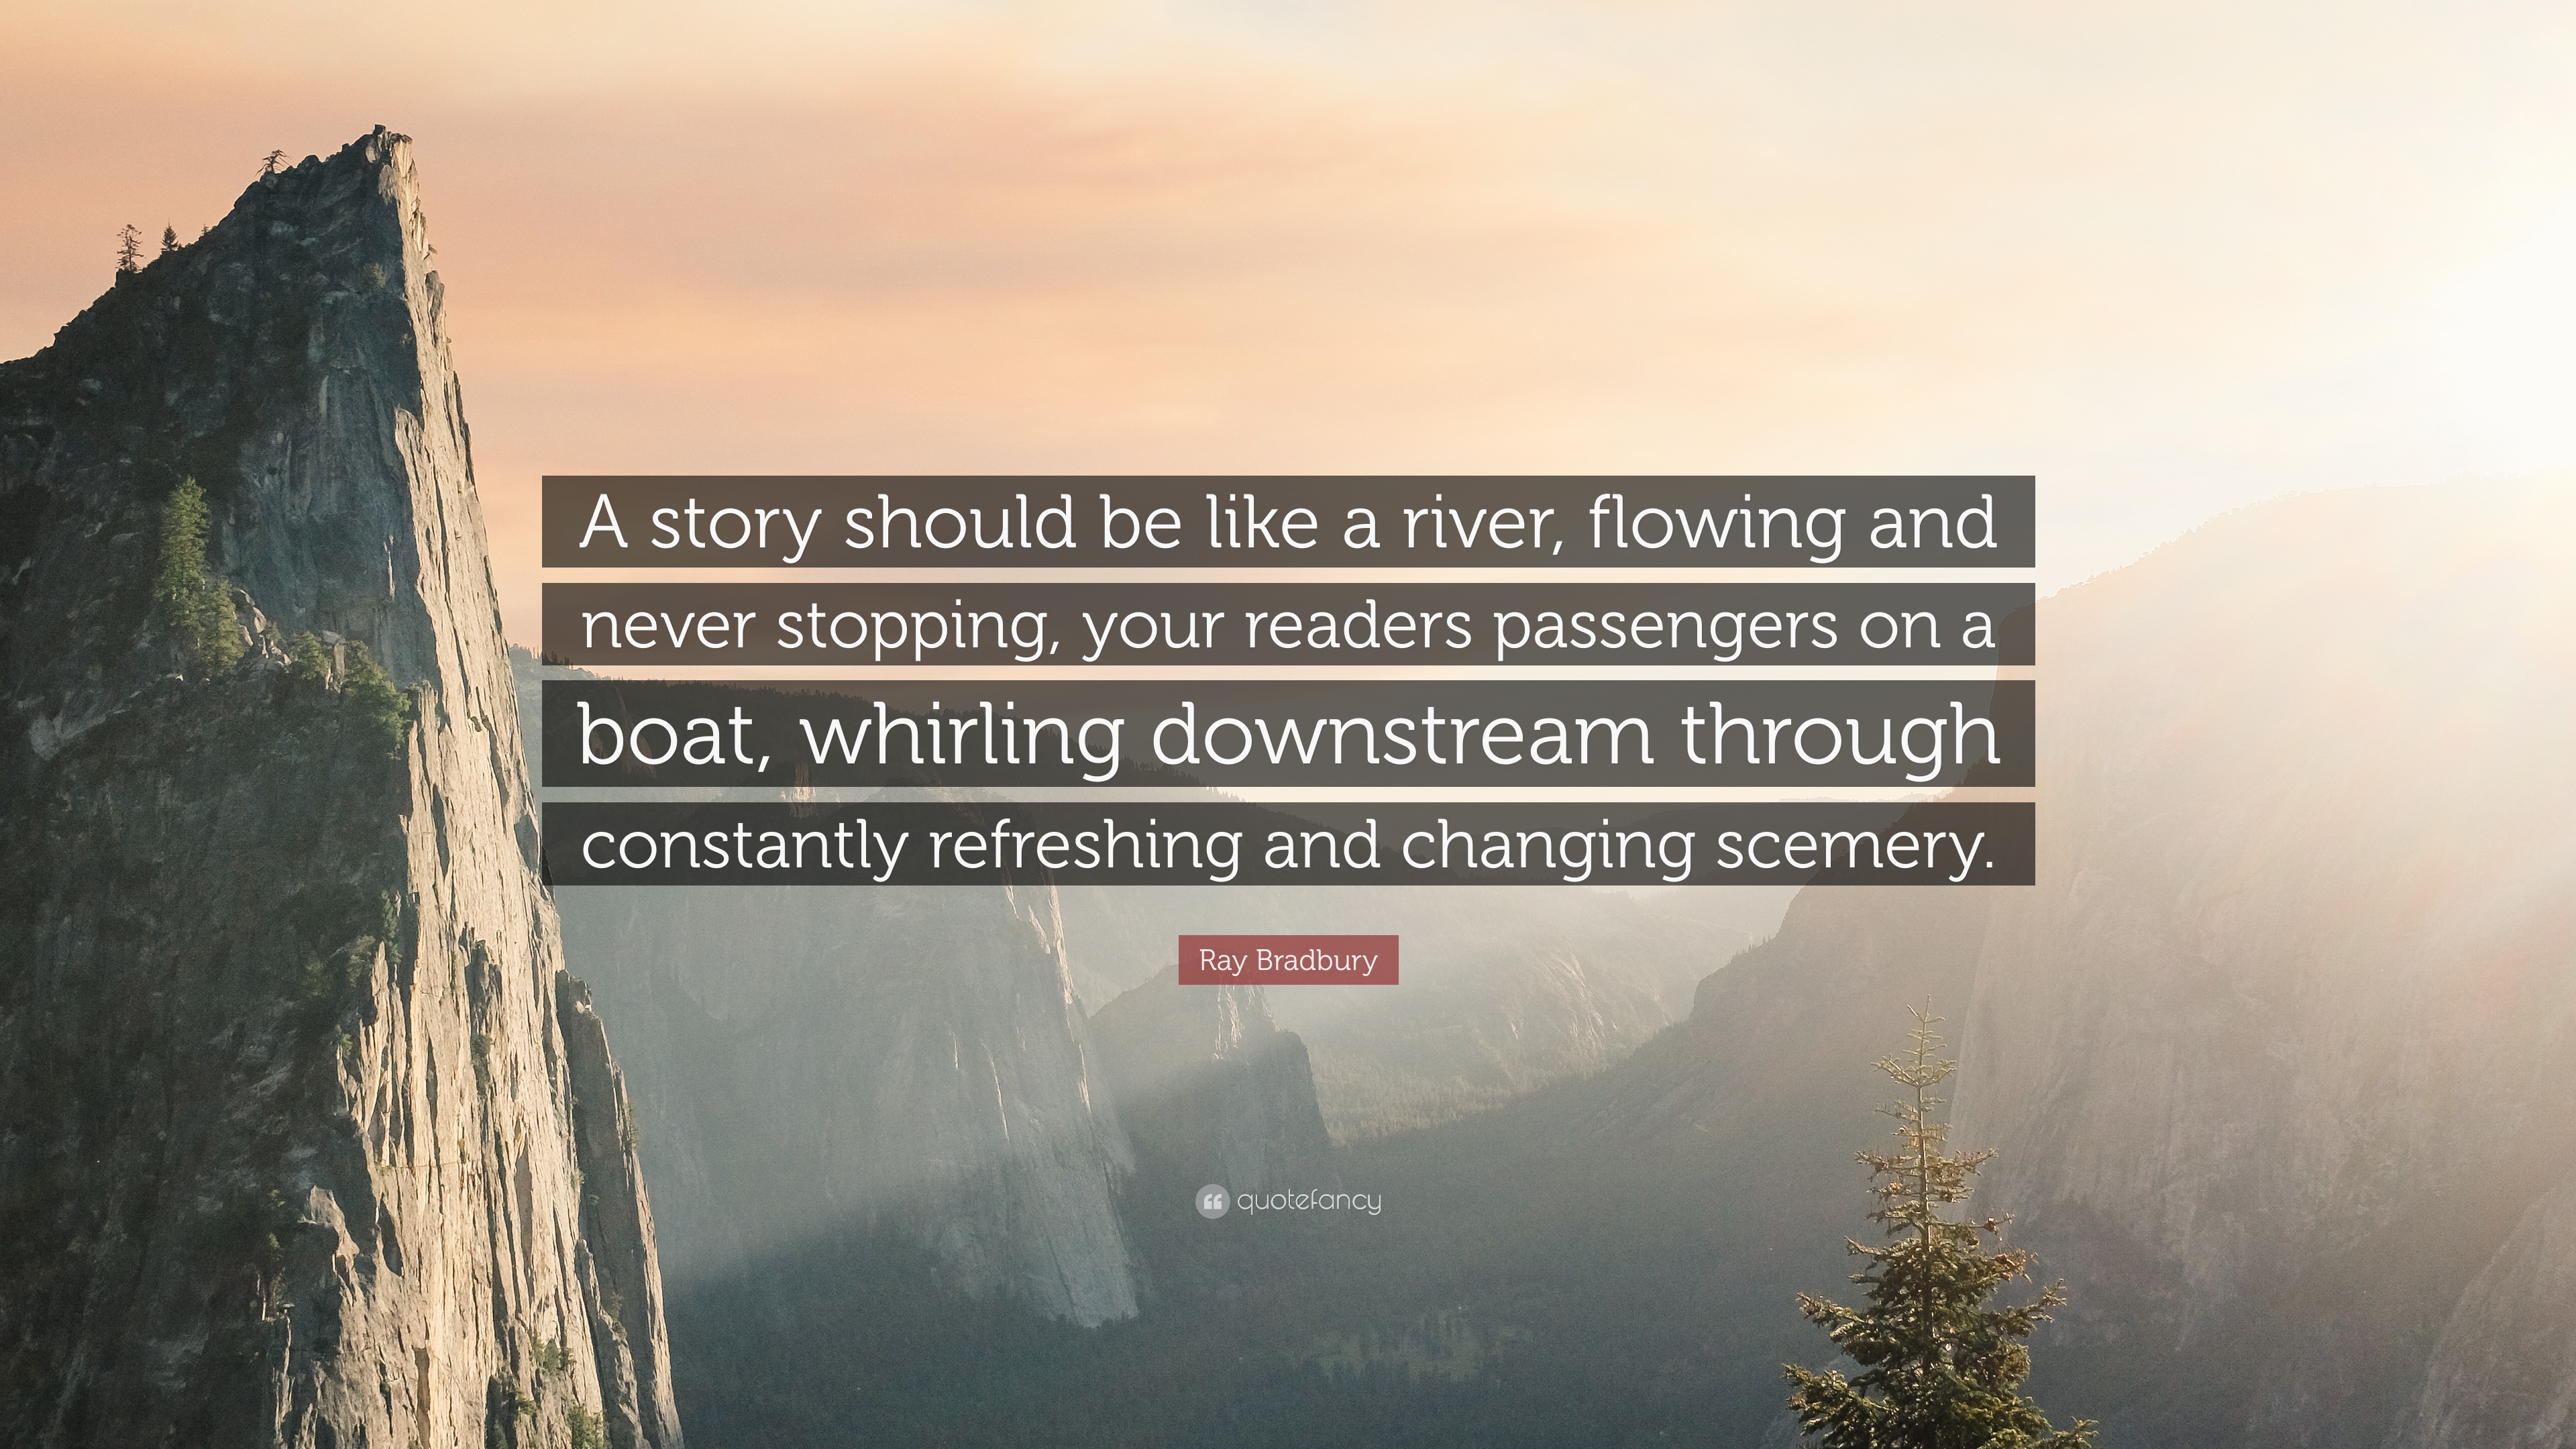 Ray Bradbury Quote: “A story should be like a river, flowing and ...